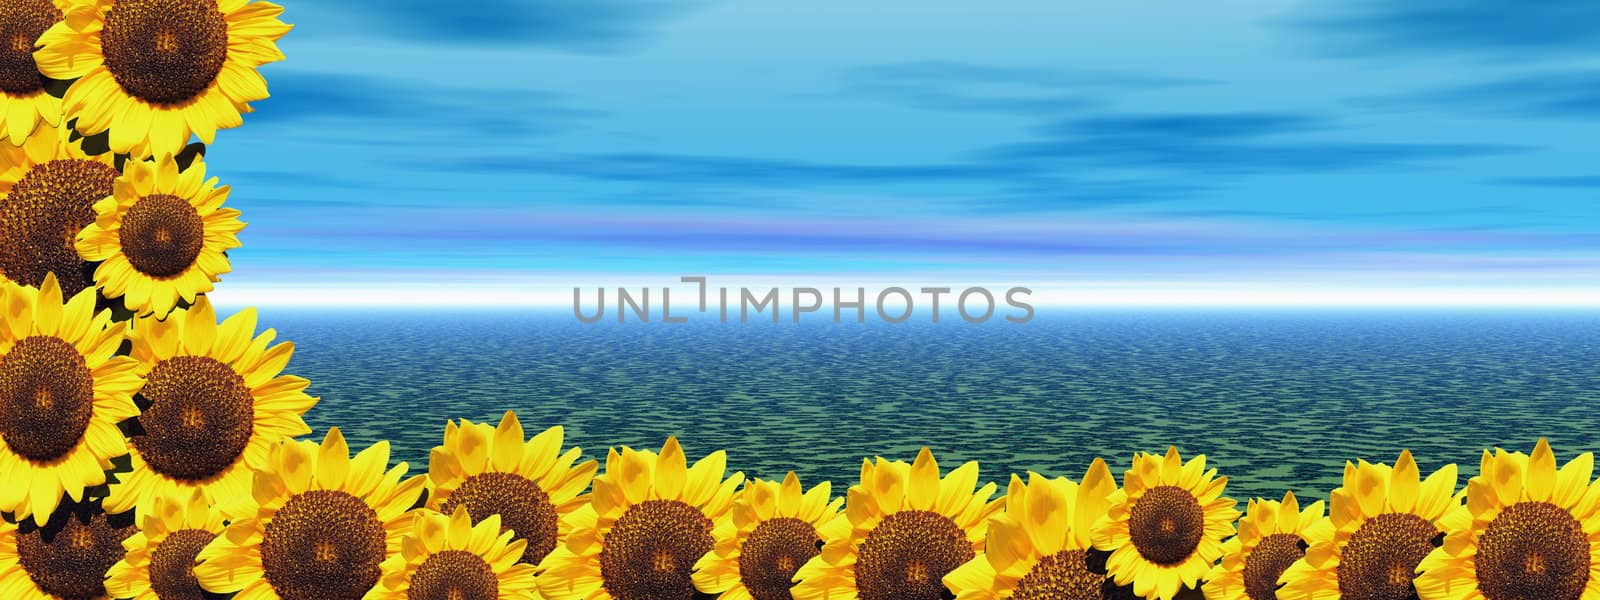 Background of blue sky and ocean with lots of sunflowers on the left side